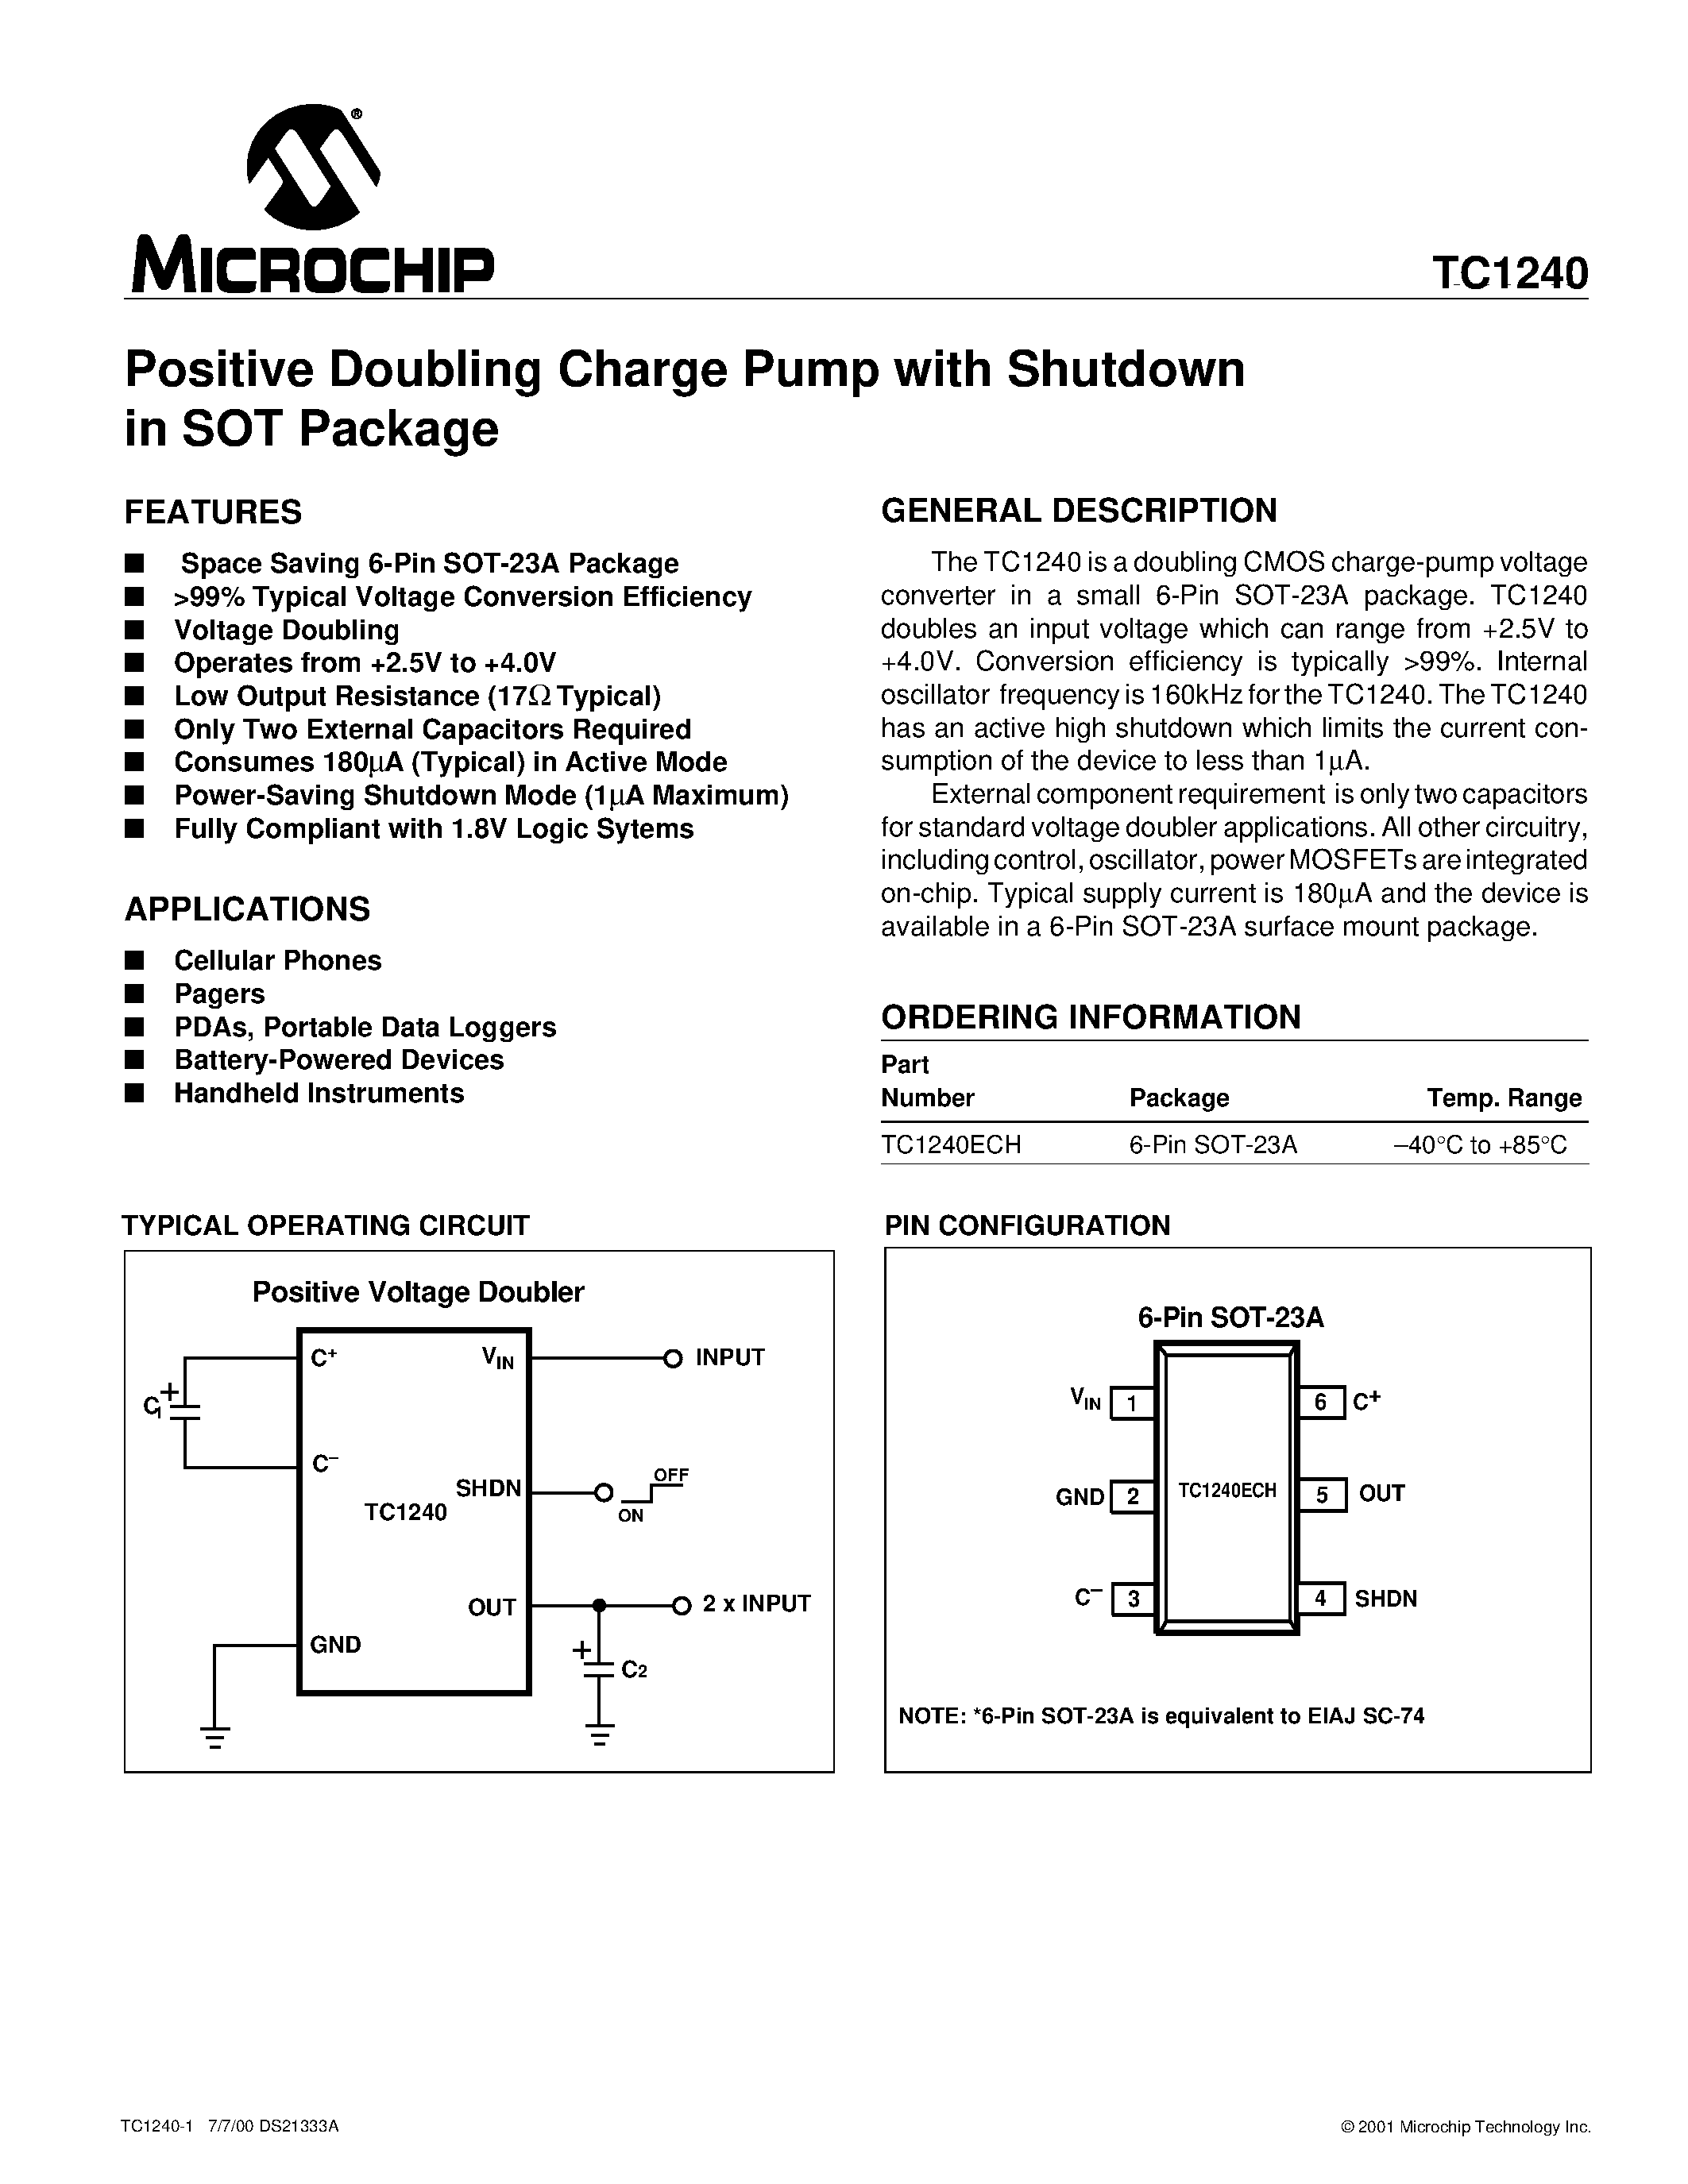 Datasheet TC1240 - Positive Doubling Charge Pump with Shutdown in SOT Package page 1